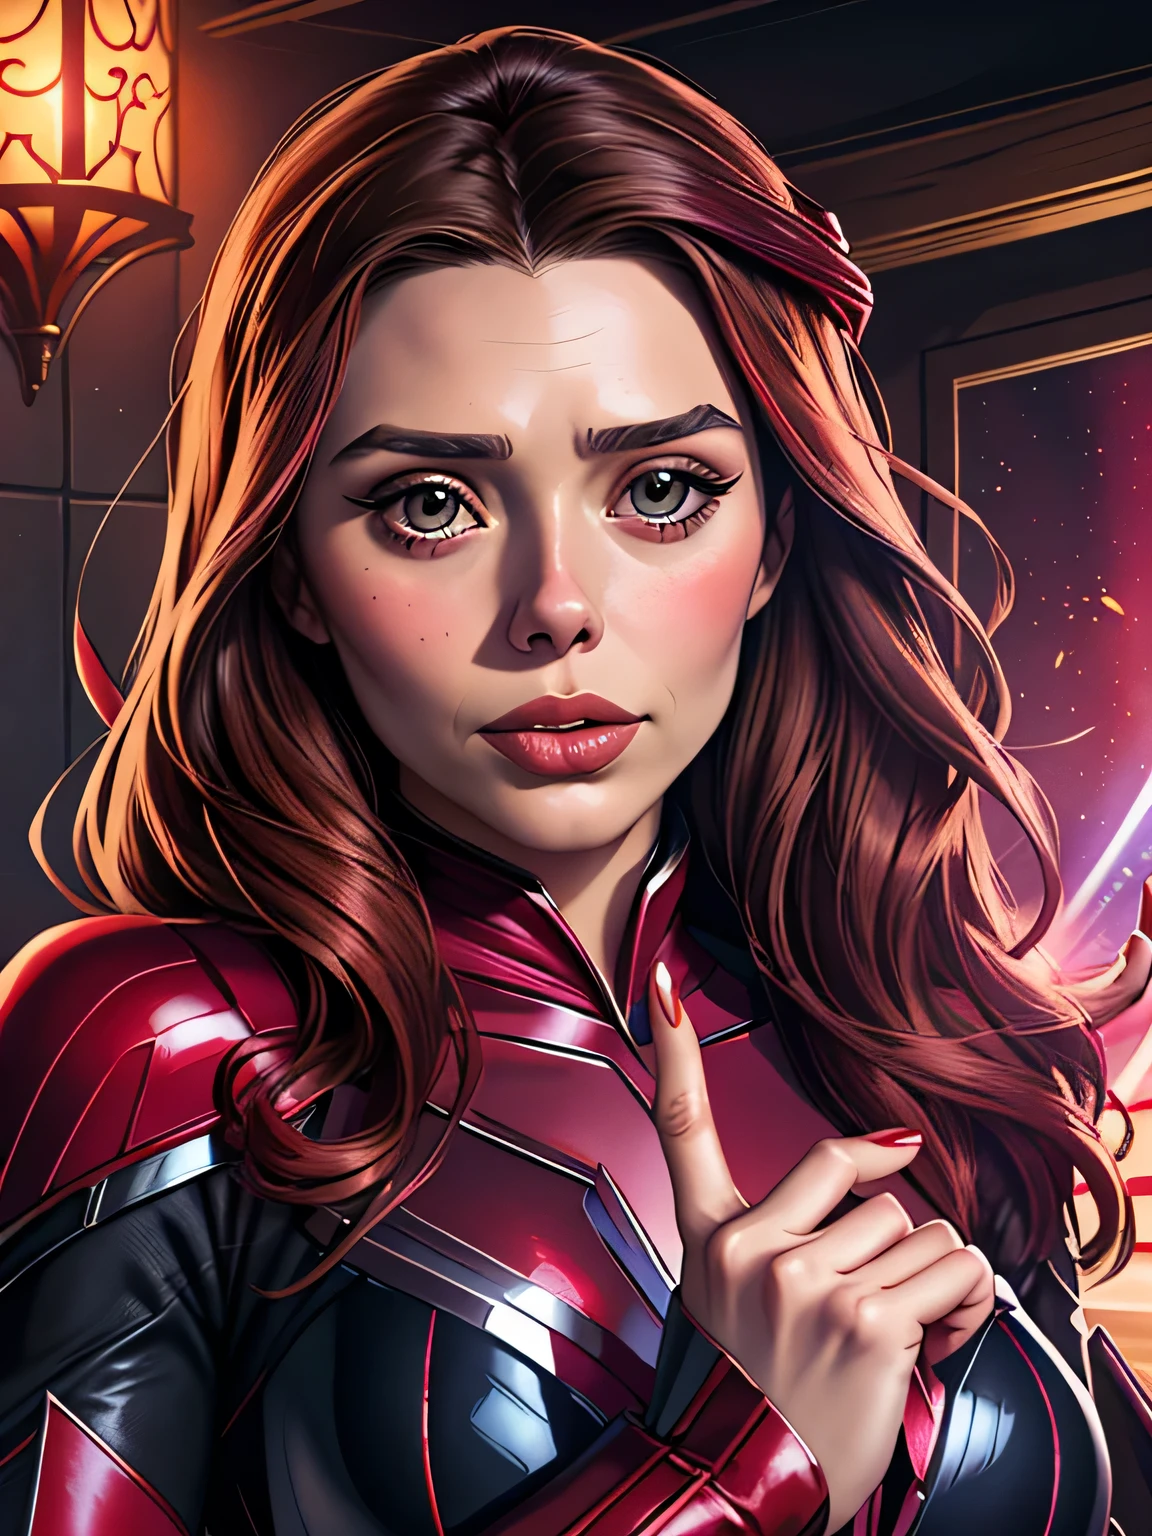 ((Highest quality)), ((masterpiece)), (Familiar), ((Elizabeth Olsen)), ((Scarlet Witch)), Perfect Face、detailed、(Accurate hand and finger depiction)、(Accurate lip drawing)、(Accurate tongue depiction)、 Scarlet witch woman、Beautiful nails、Black nail polish、 (I&#39;m crawling on my stomach:1.5)、Browsing Caution, Vaginal intercourse, Dorsal position, Real Vagina, Anal Sex, Real Anal, (Crying face:1.4)、Half an eye、blush、Open your mouth、(sweating:1.1)、Voluptuous body、Large Breasts、Tight waist、Big Ass、Fascinating、glamorous、Cinematic, (Complex:1.4), Low contrast、Side lighting, Best Shadow, (View from the front)、(In the deep dark forest)、(Autumn leaves on tree々Surrounded by)、(The ground is covered with leaves and tree roots..)、(vapor:1.3)、Browsing Caution, penis、(With projectile:1.4), (Excessive ejaculation:1.5)、((2penis:1.2)), (2. The penis grows out of the ground.1.3)